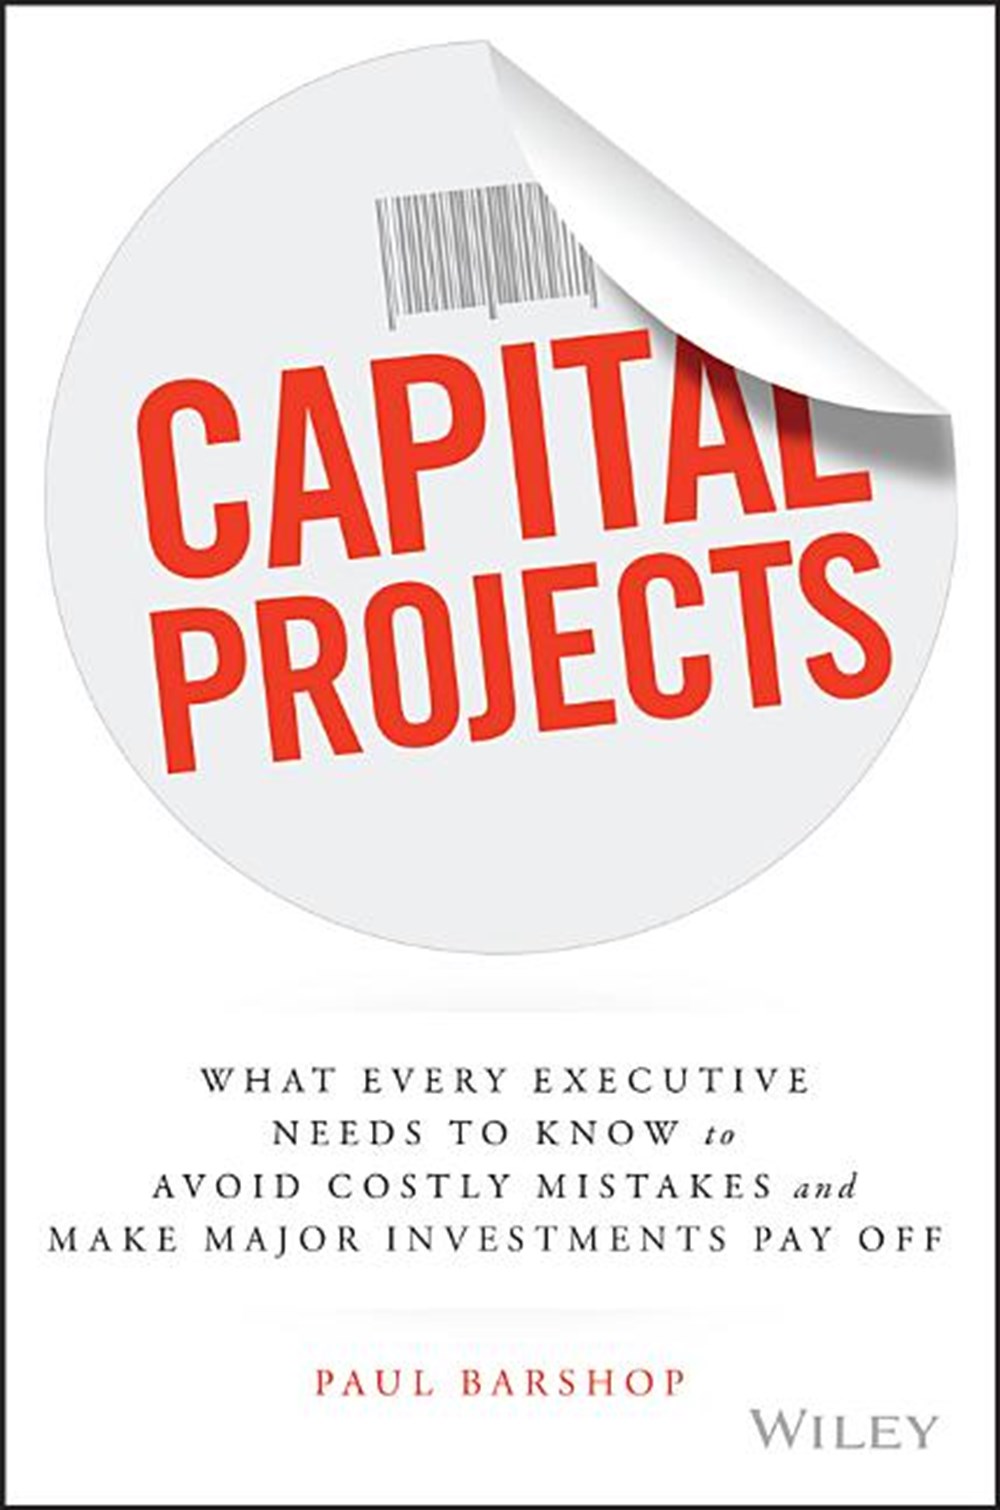 Capital Projects: What Every Executive Needs to Know to Avoid Costly Mistakes and Make Major Investm